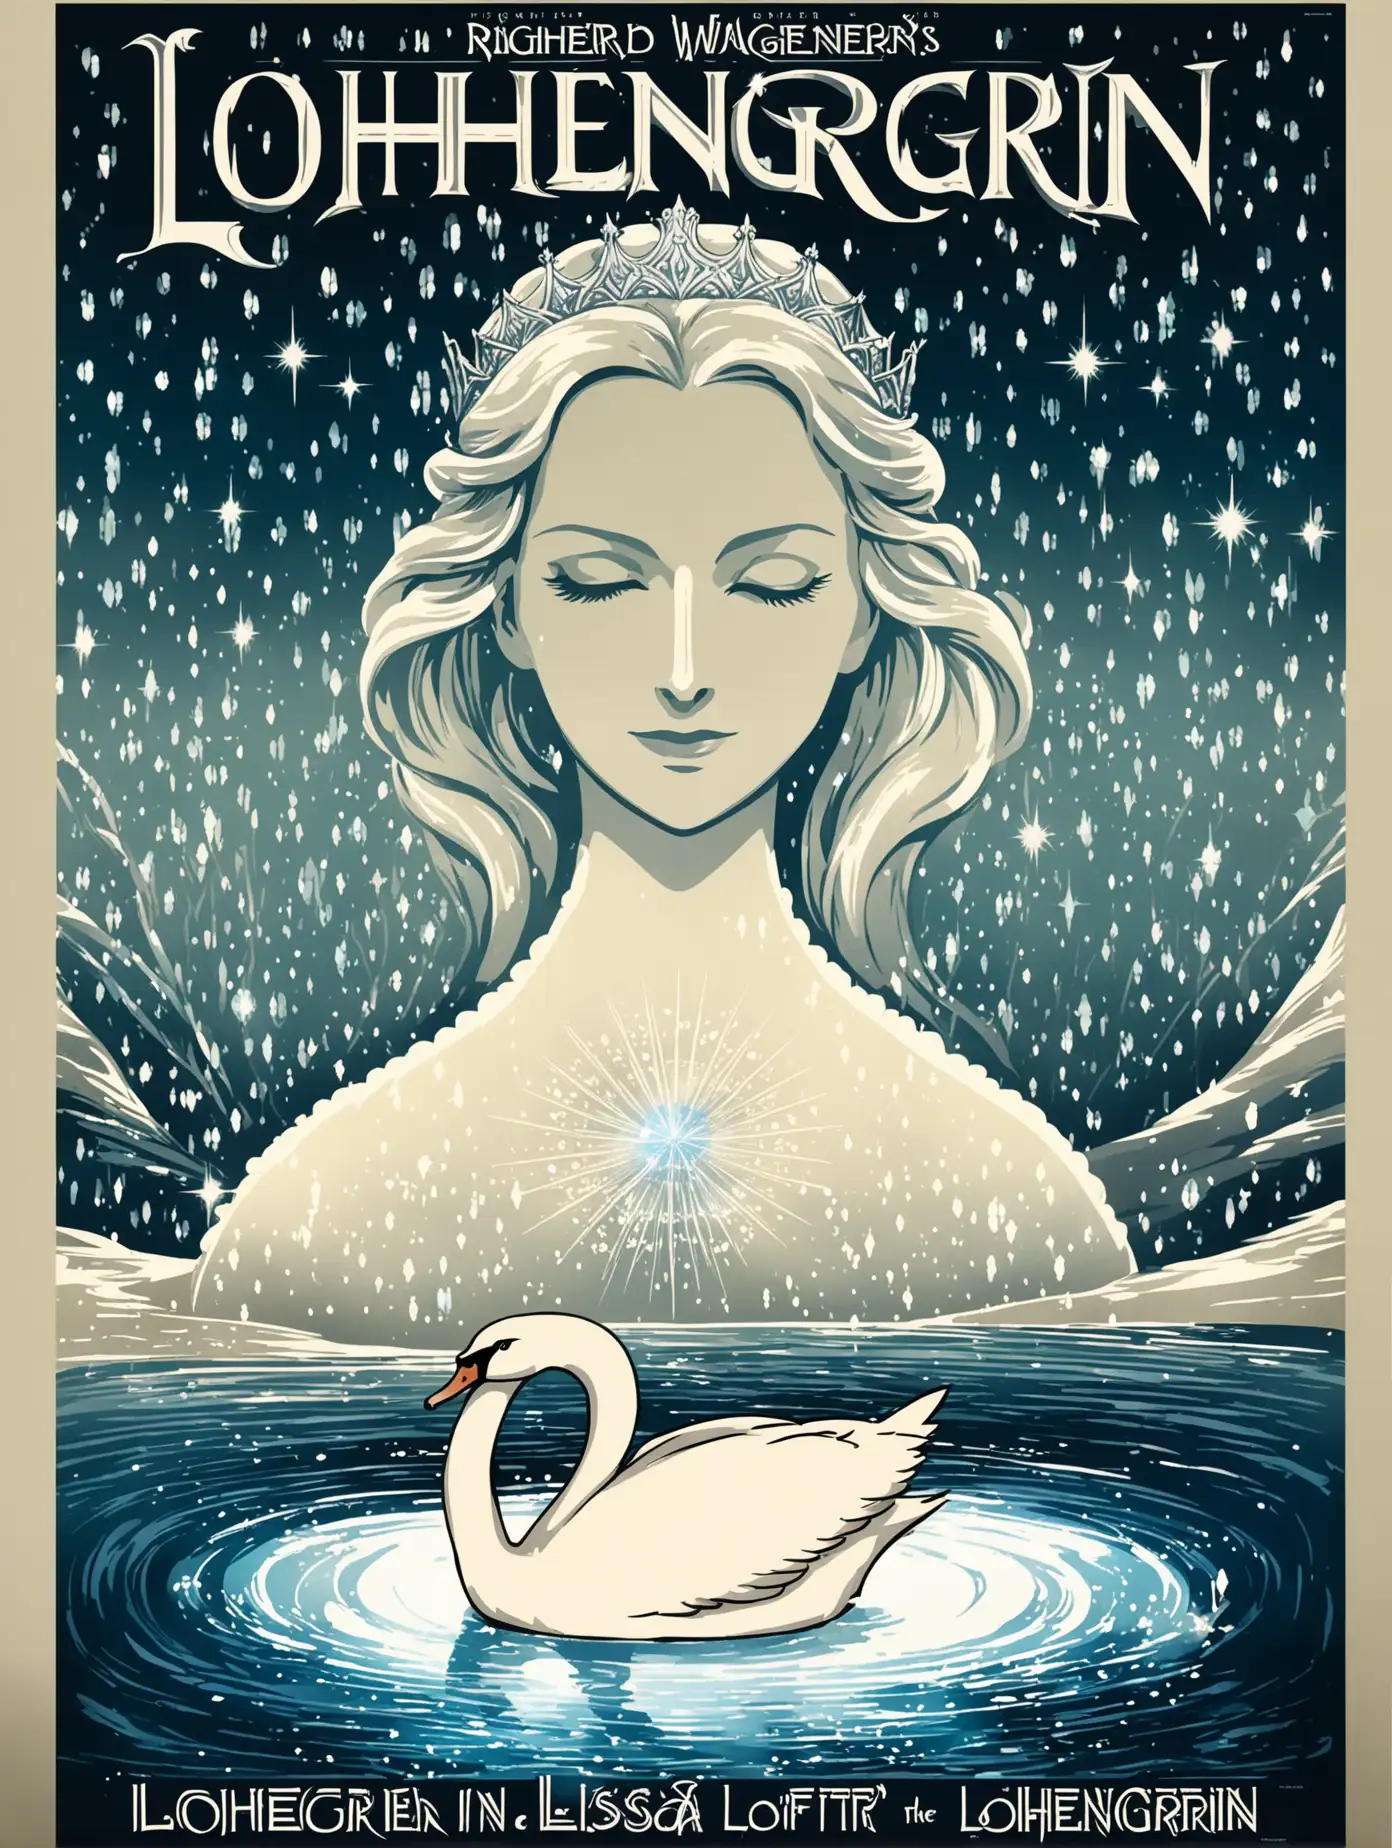 poster art for Richard Wagners Opera Lohengrin
containing the face of Elsa to the left looking into the frame bakground a sparkling river illustrated and a swan silhouette